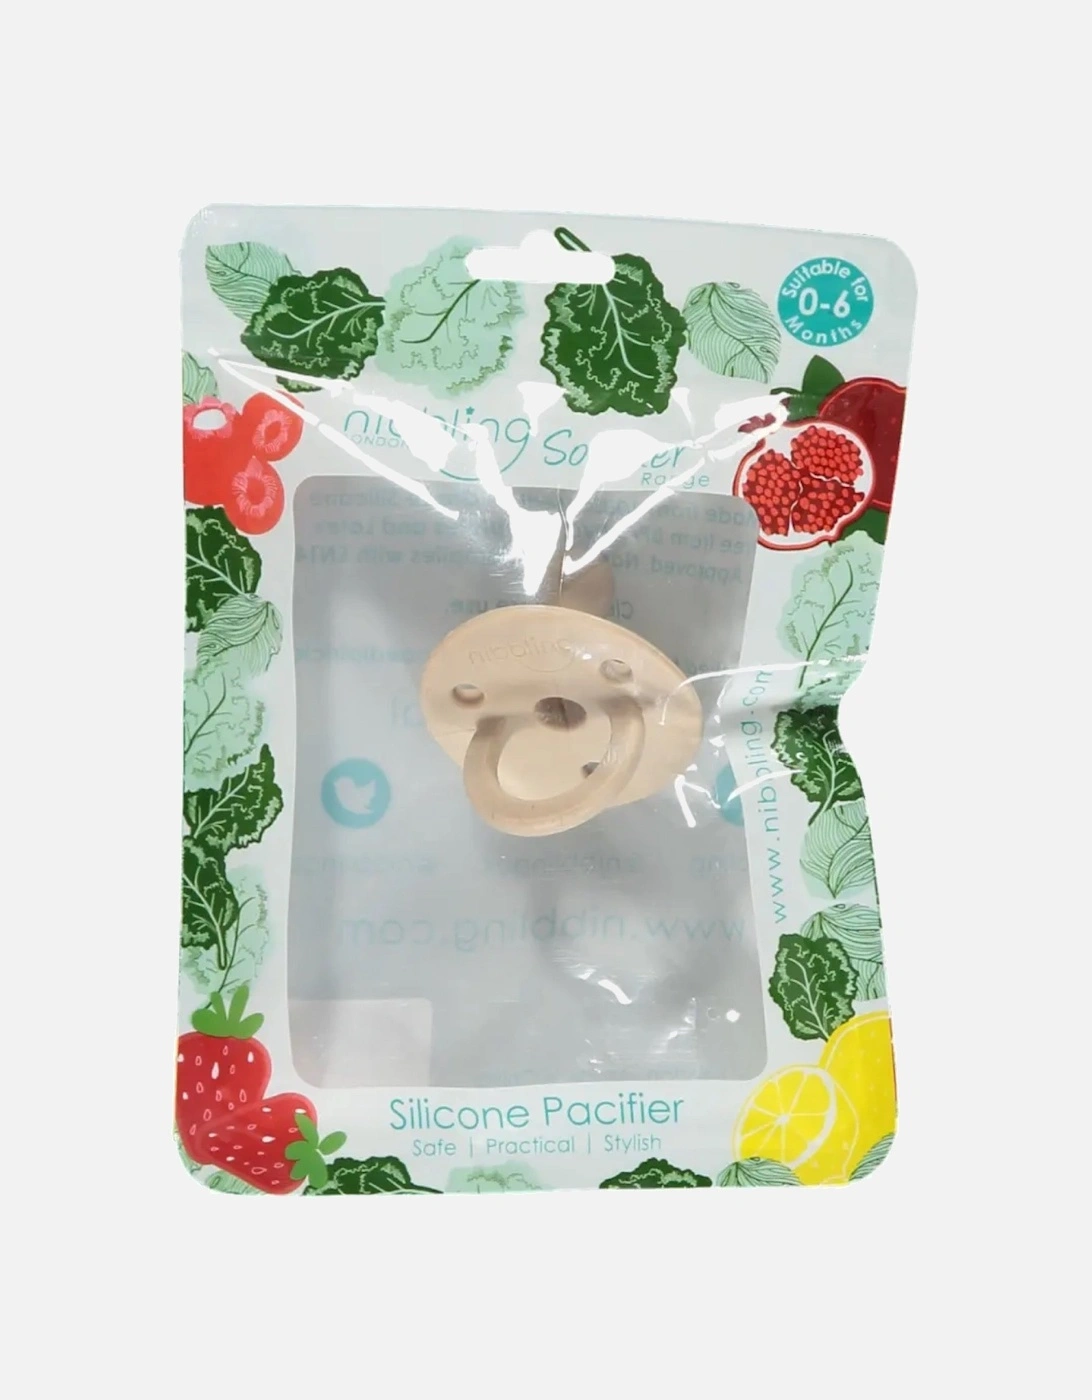 Oat Silicone Pacifier